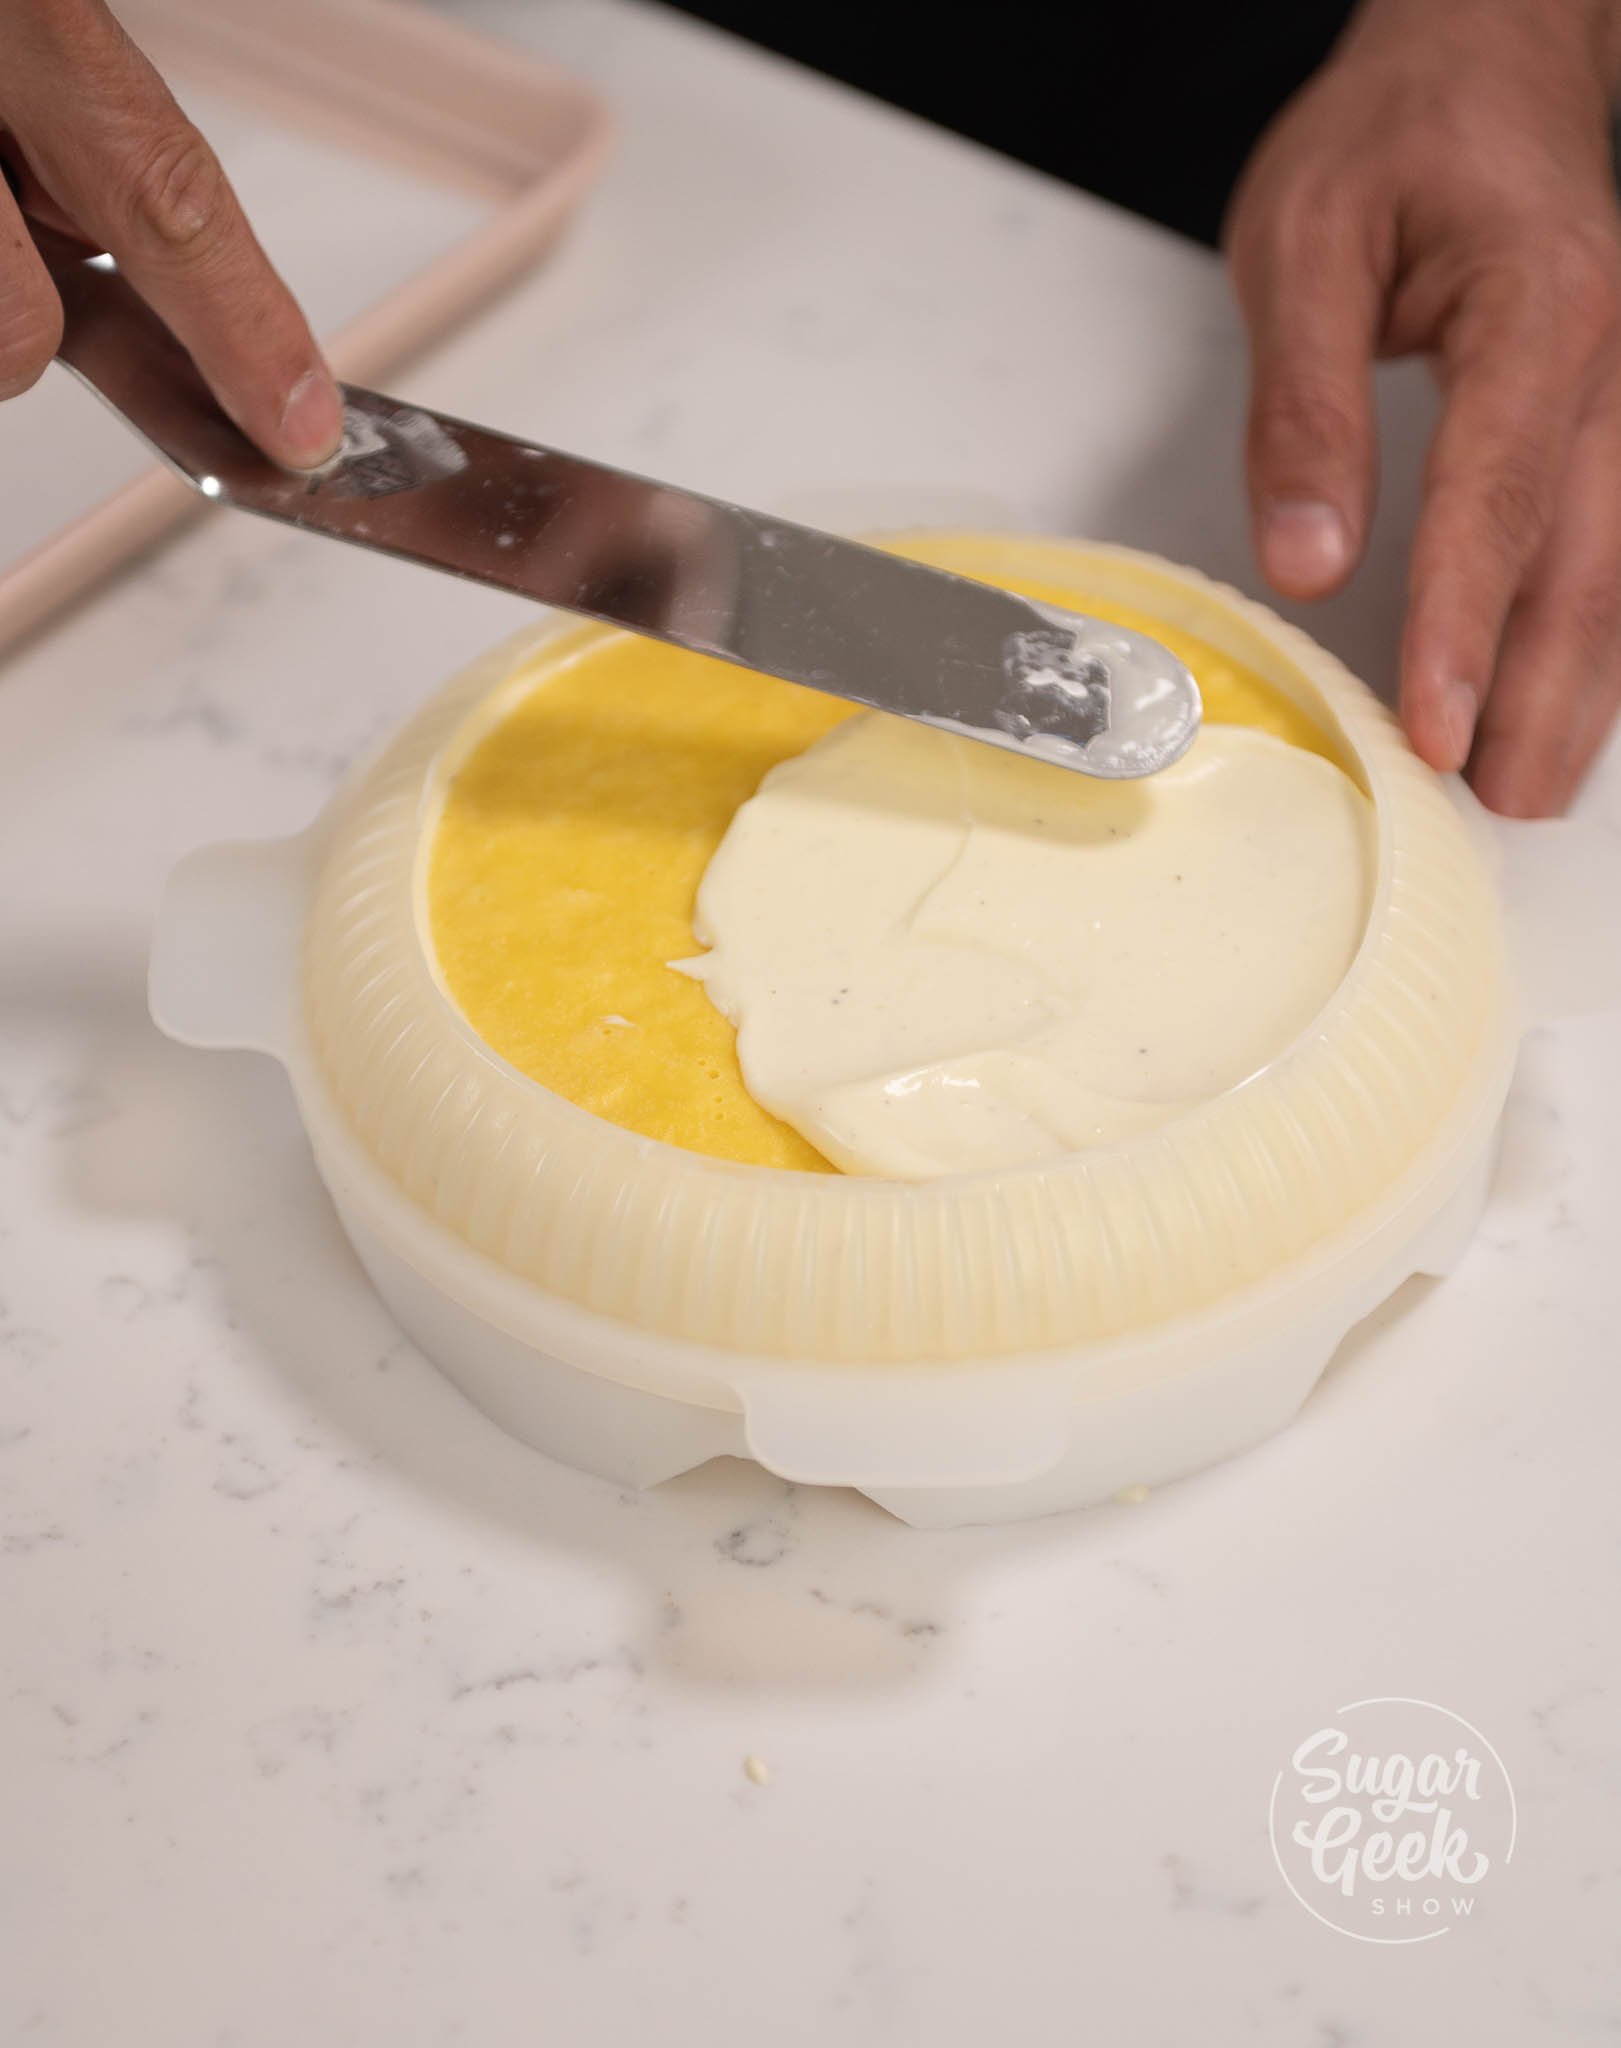 hand using spatula to spread mousse over insert.